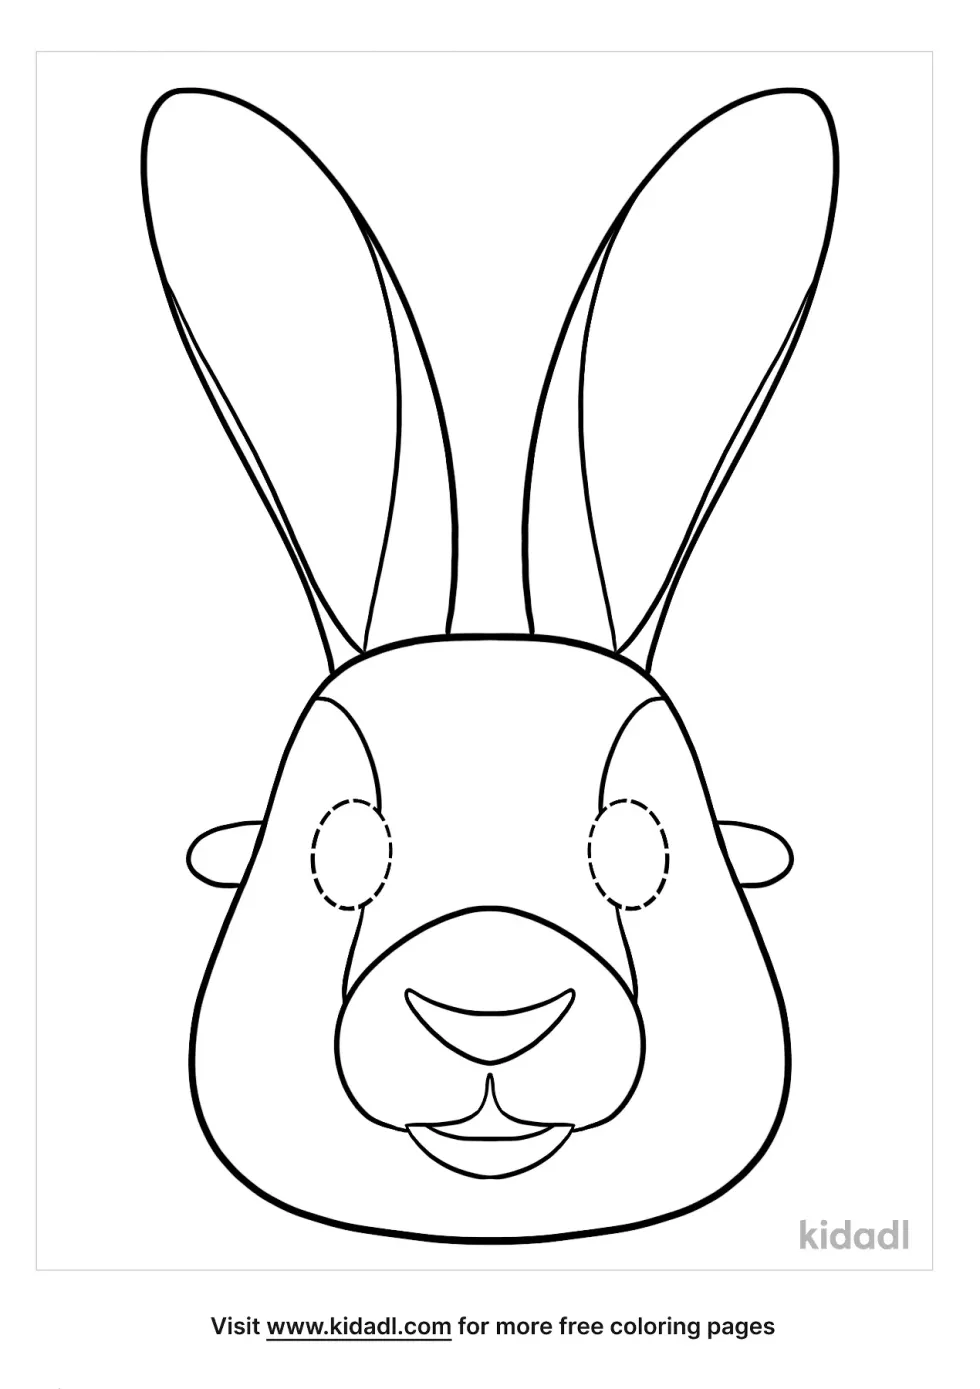 March Hare Mask Coloring Page